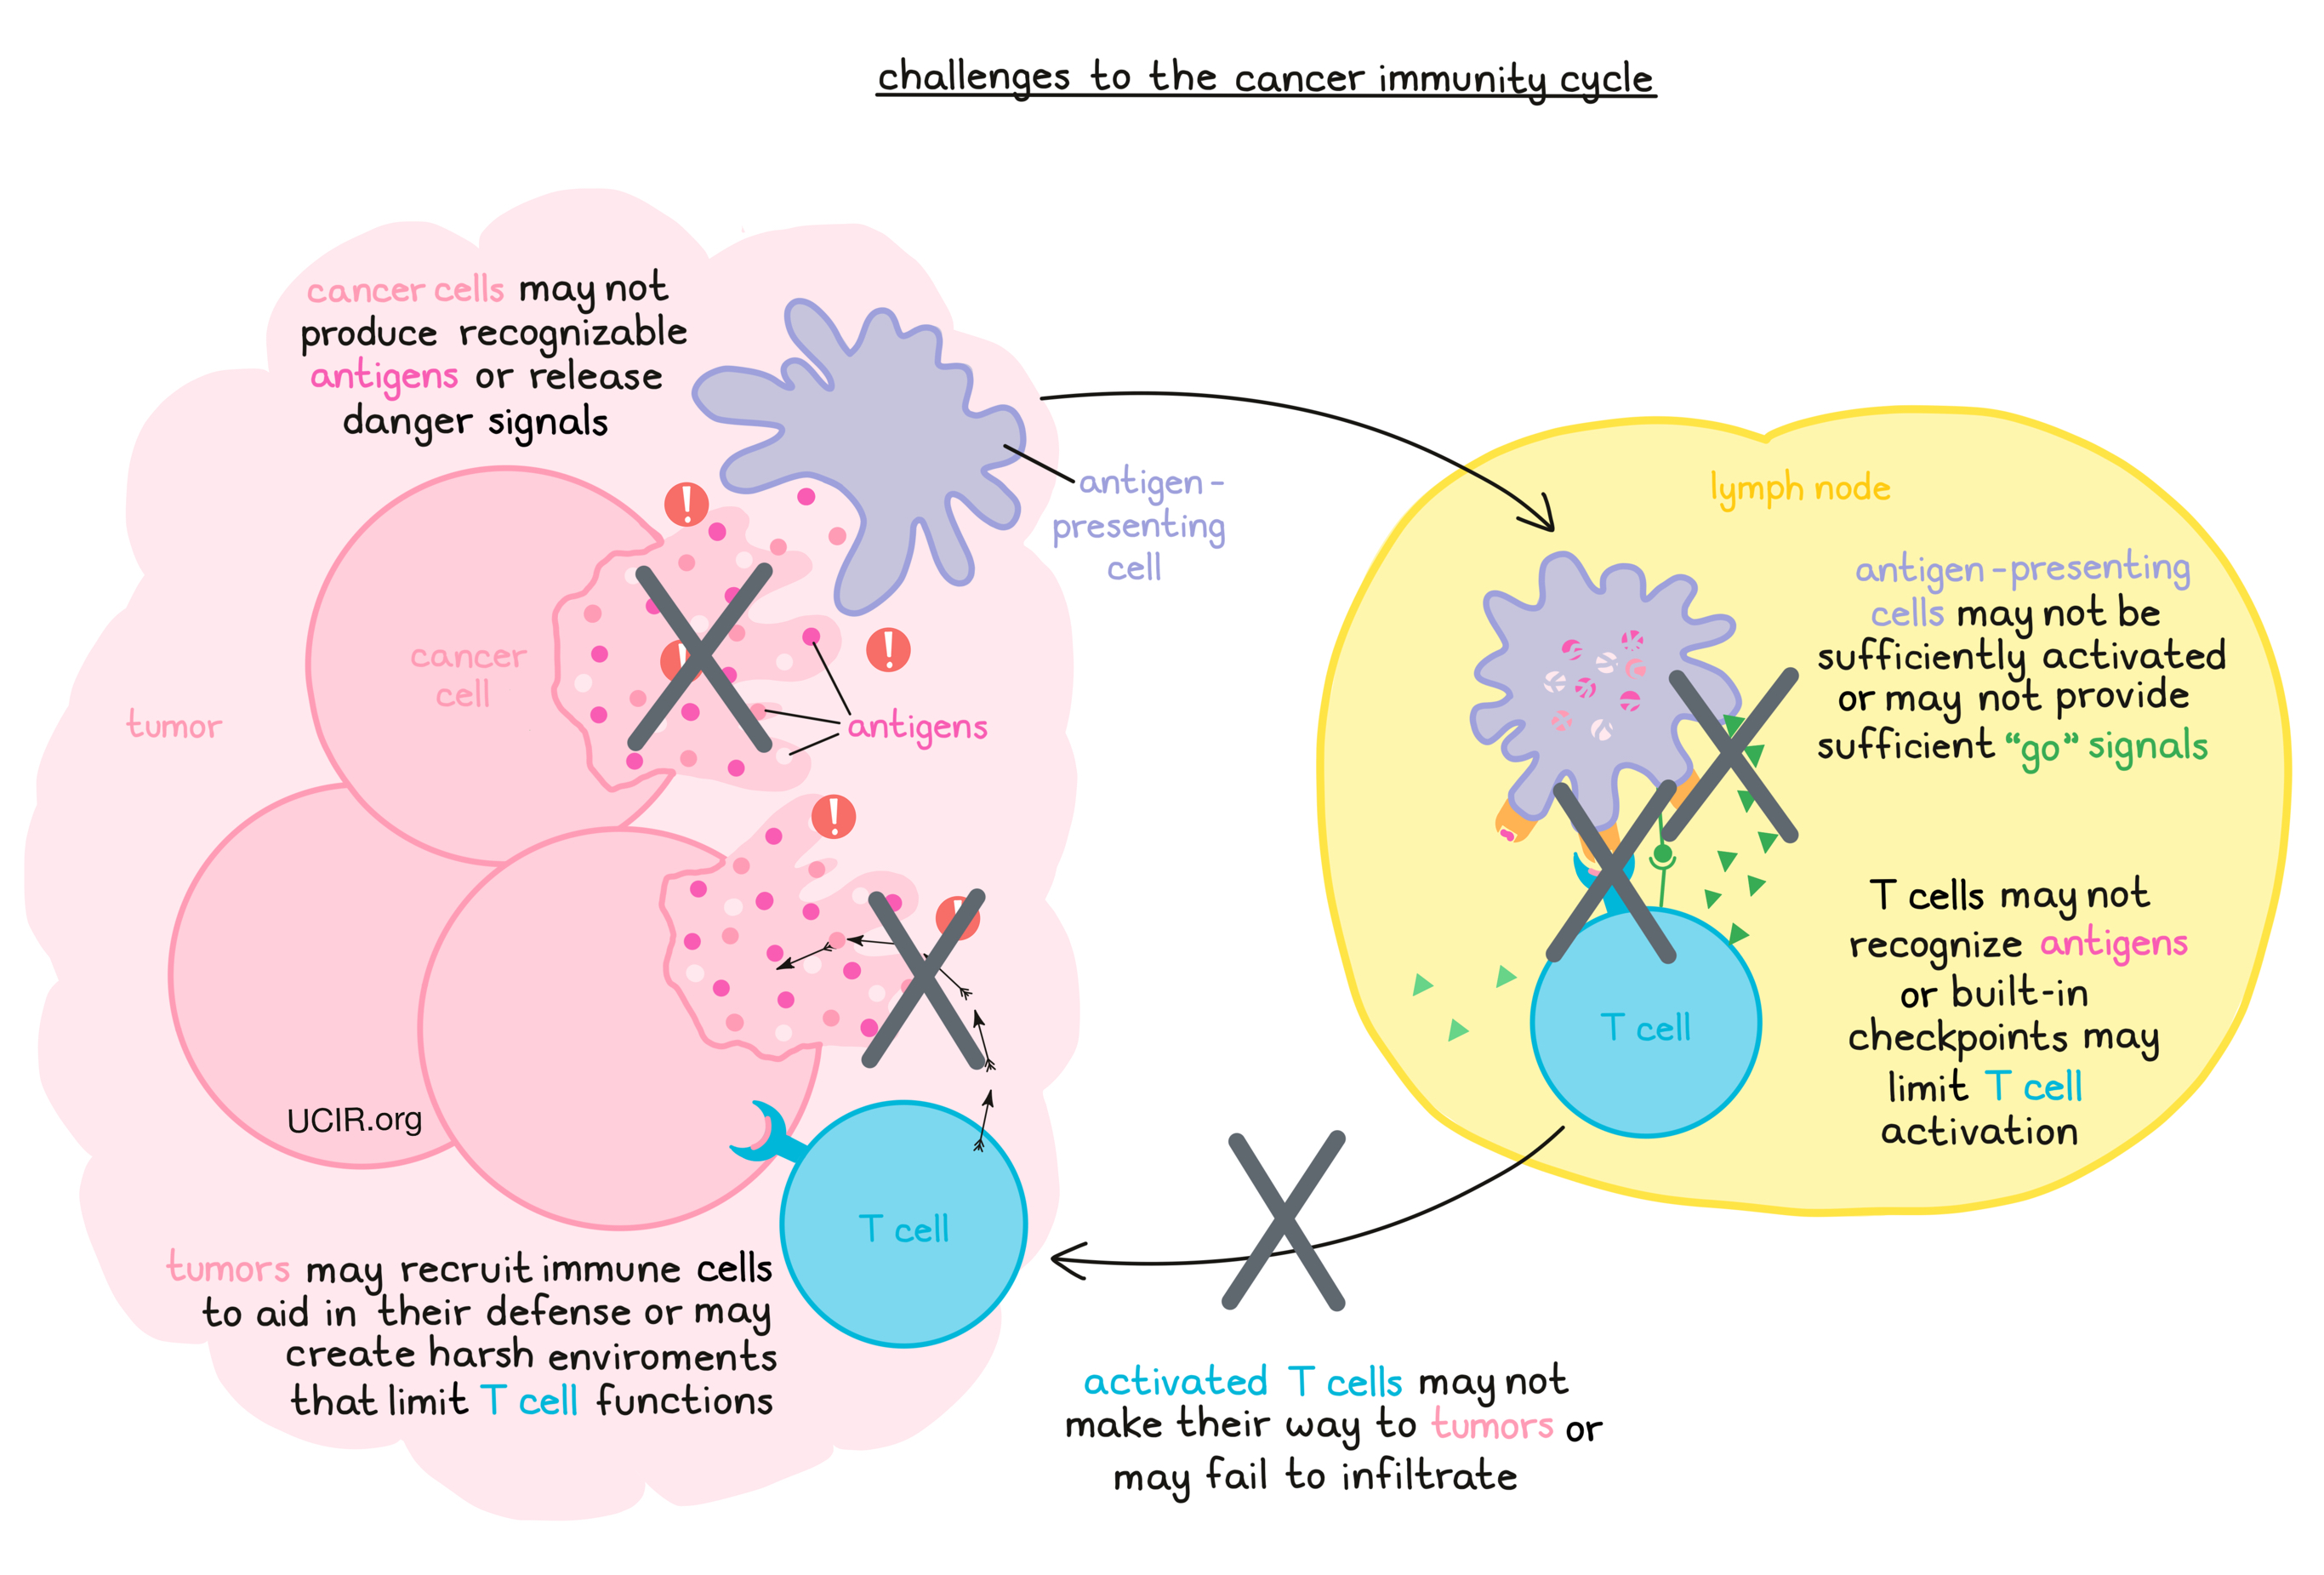 Challenges to the cancer immunity cycle